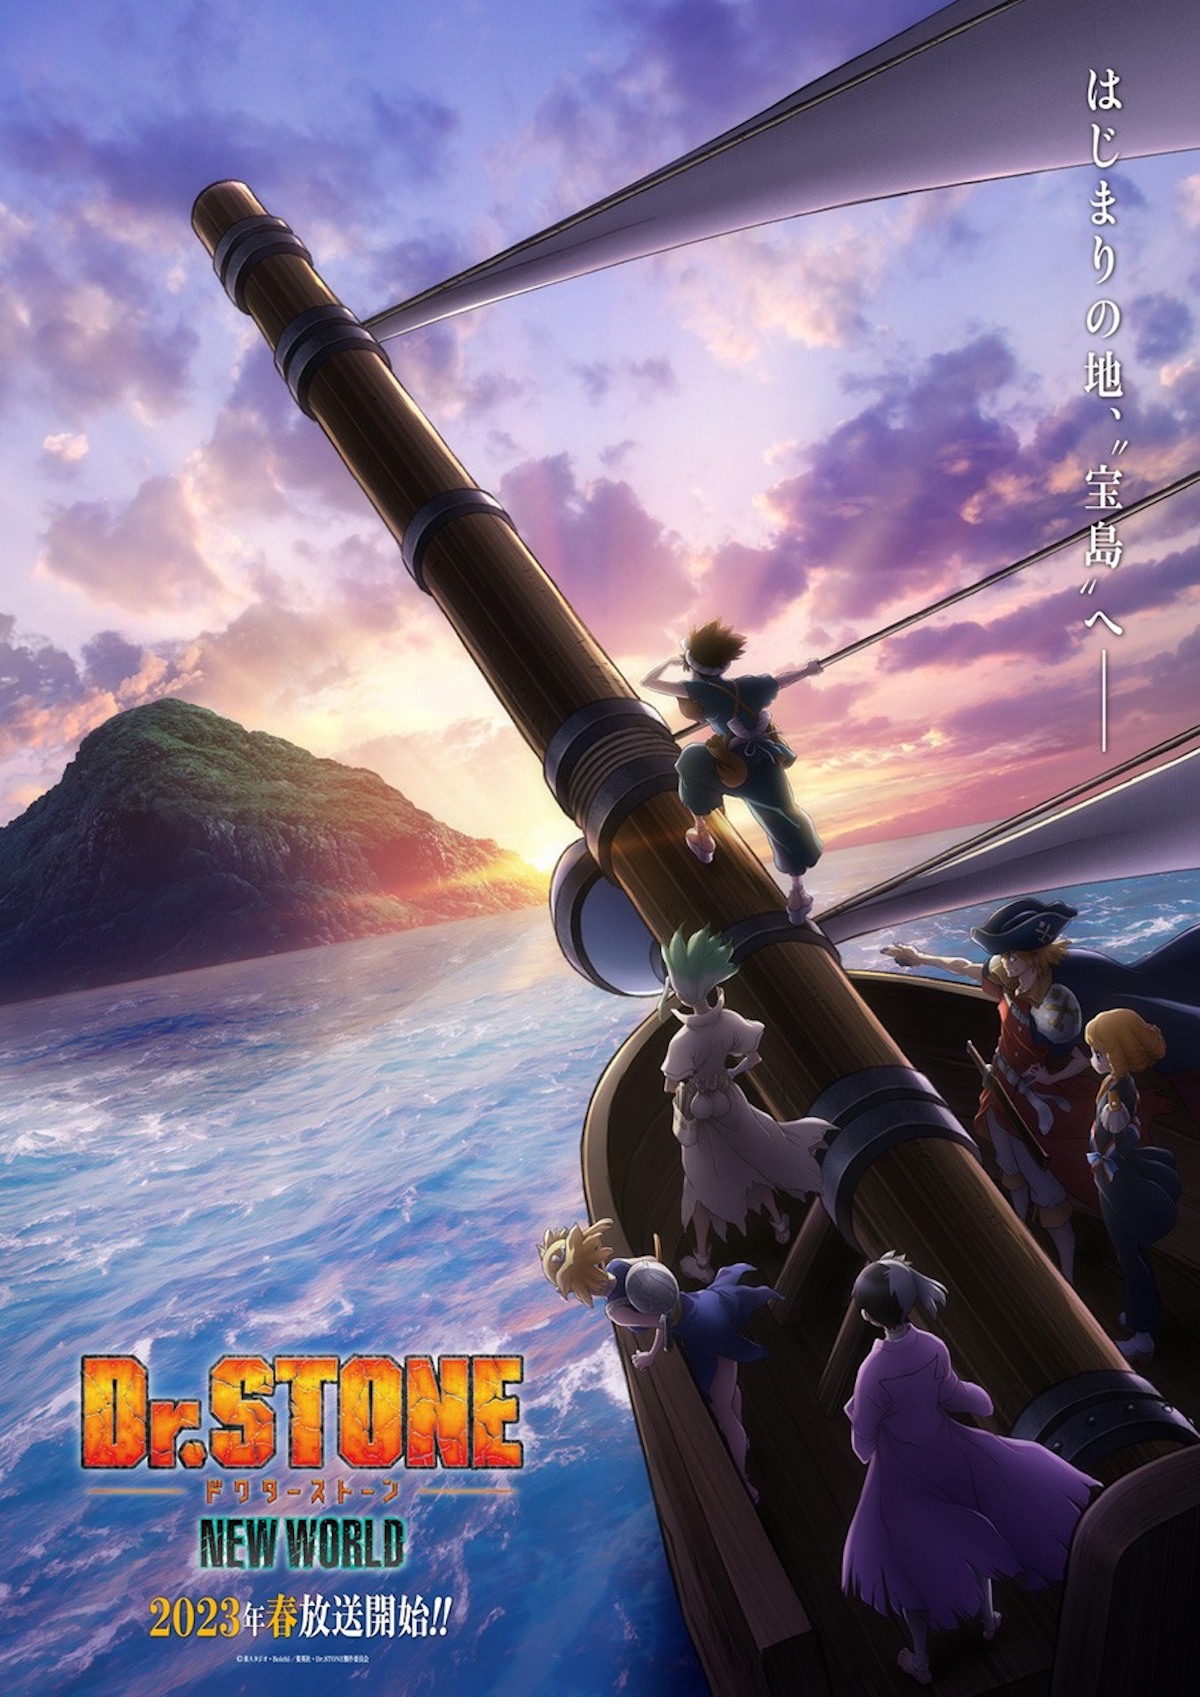 Dr. Stone Season 3 Episode 6 Release Date & Time